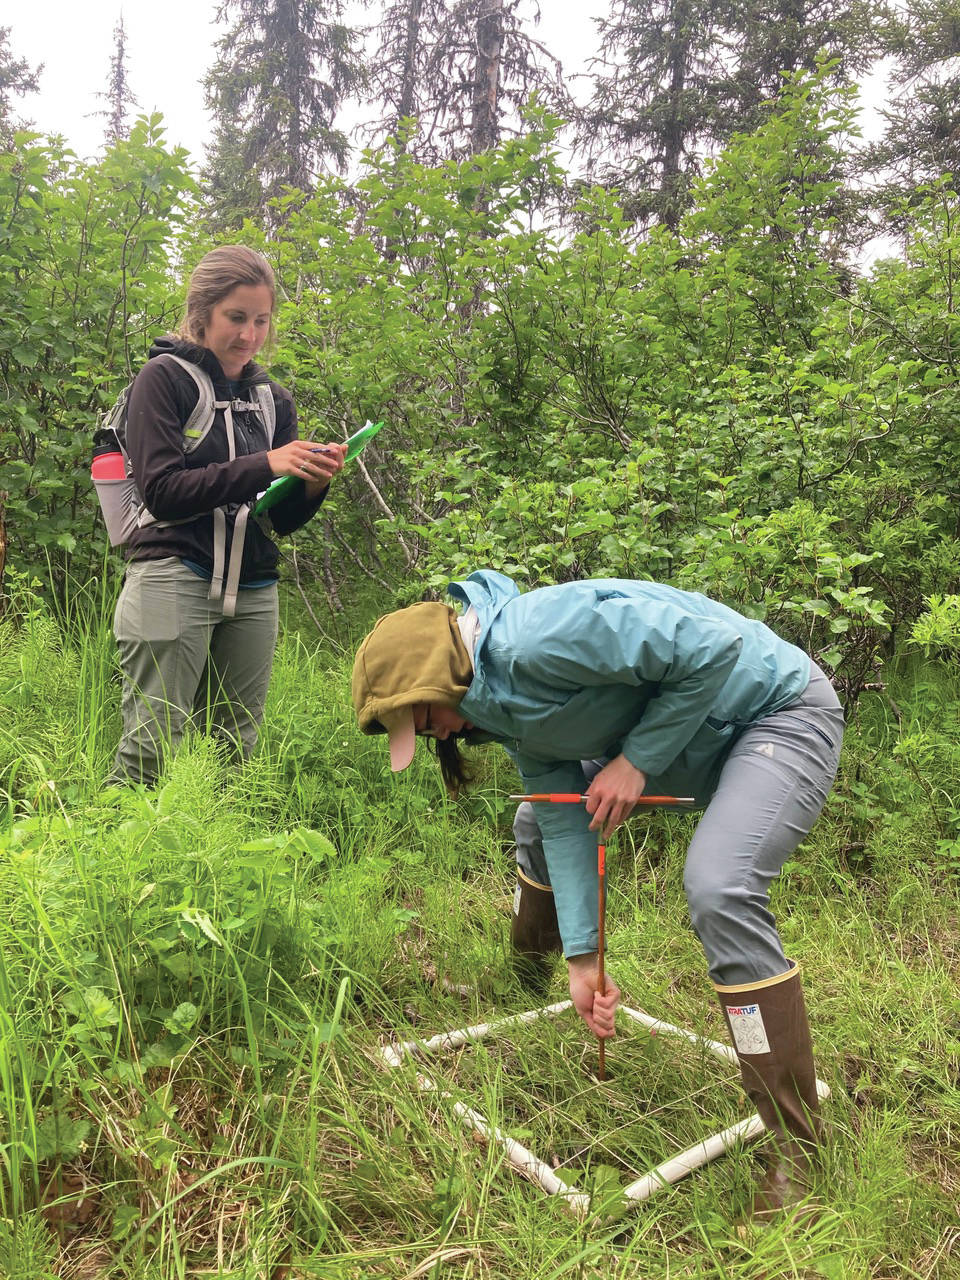 Kristin Armstrong, left, and Ashley Laukhuf, right, do grid surveys of vegetation earlier this month at Inspiration Ridge Preserve near Homer, Alaska. (Photo by Nina Faust)